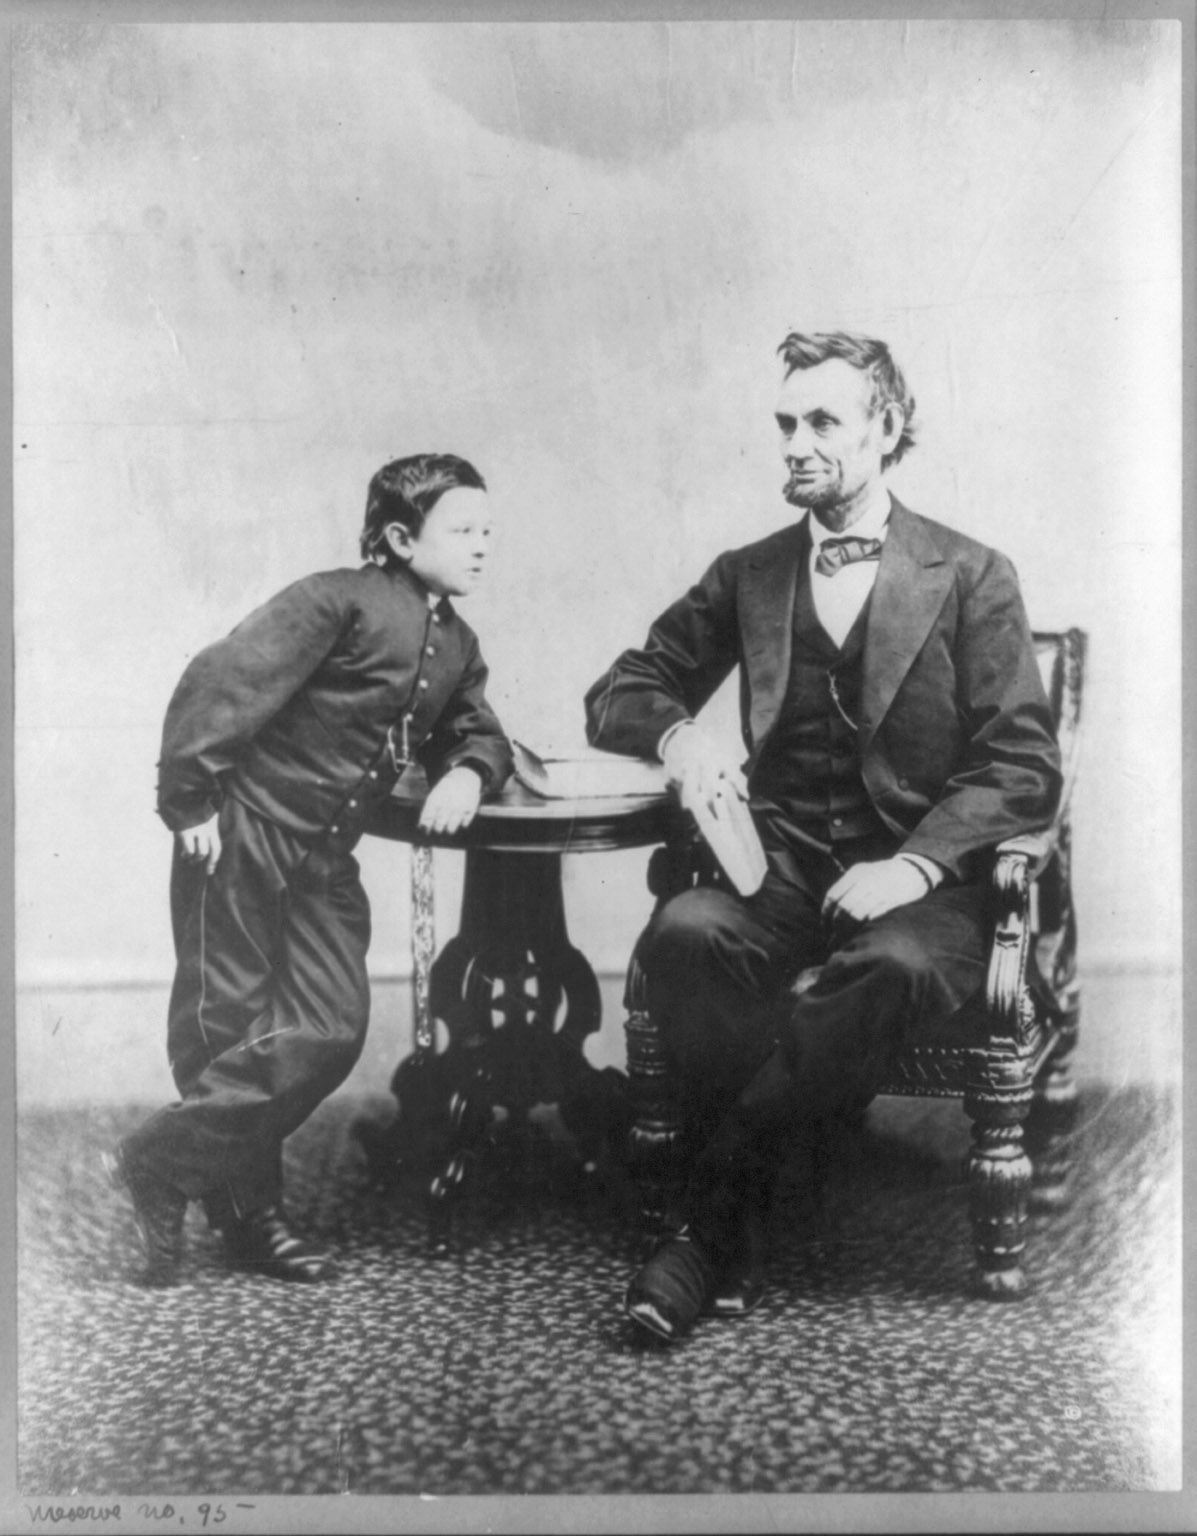 Abraham Lincoln : When the Lincolns moved into the White House in 1861, Thomas  Tad  Lincoln was 7 years old. Several sources report that the President was extremely indulgent of his younger son and tolerated behavior from him and his brother Willie that scandalized the White House staff, including a notorious incident in which Tad fired his toy cannon upon the door of the Cabinet room while his father was meeting with some advisers inside.